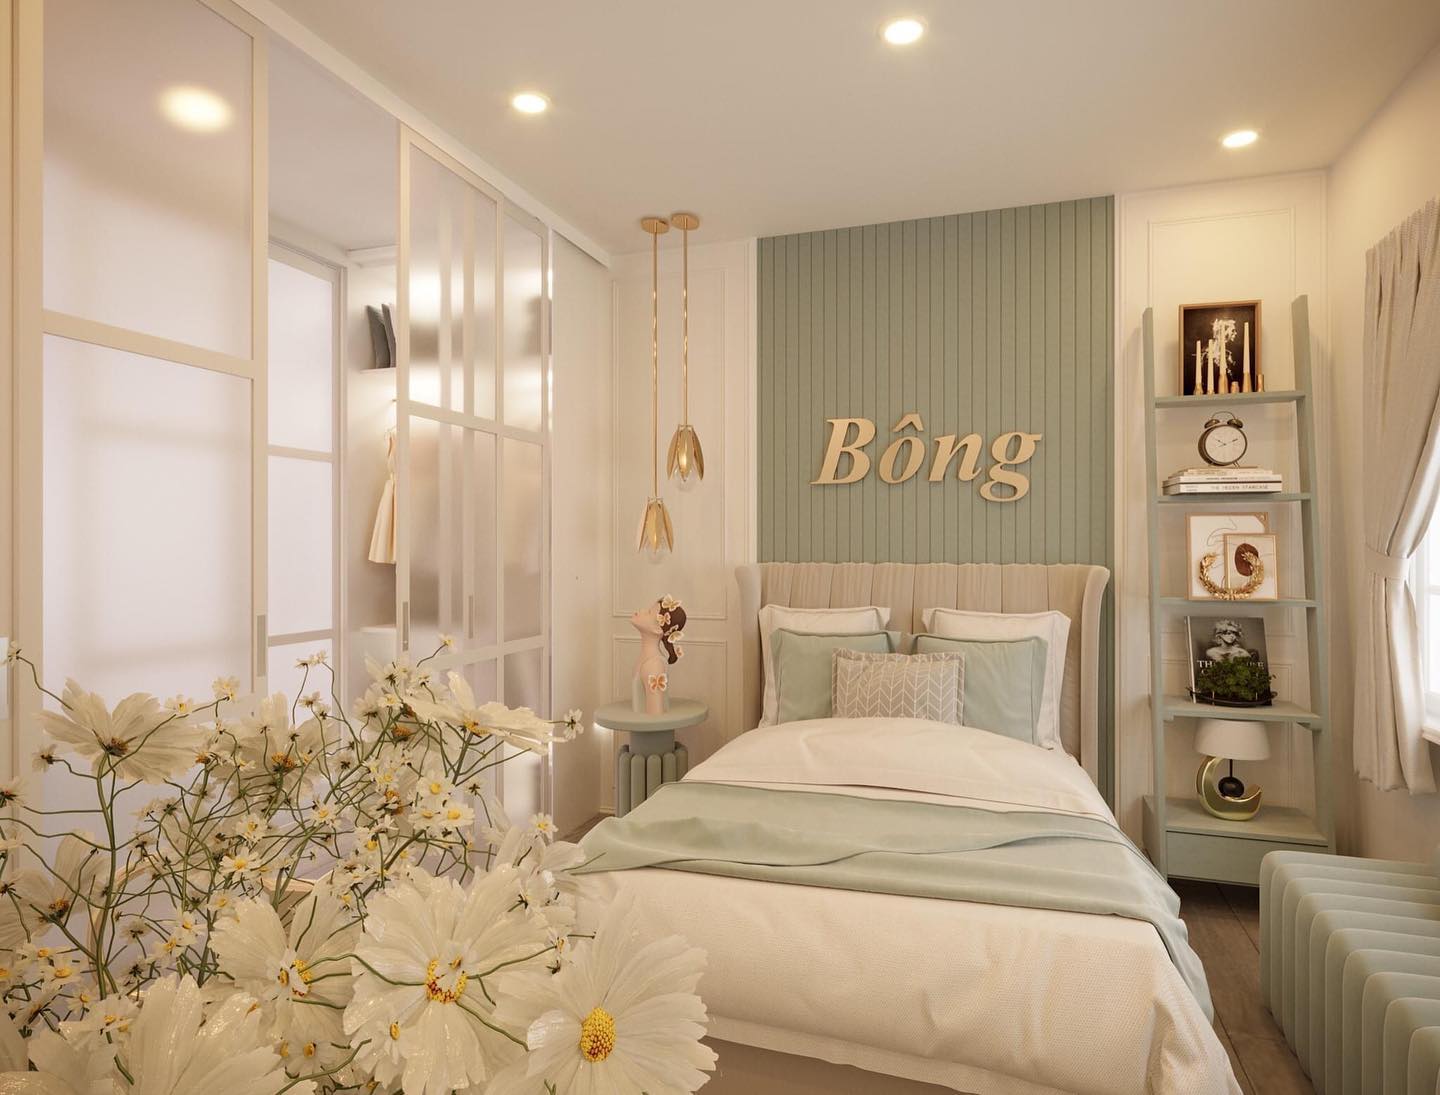 8 trendy ideas to incorporate mint green into your room decorations